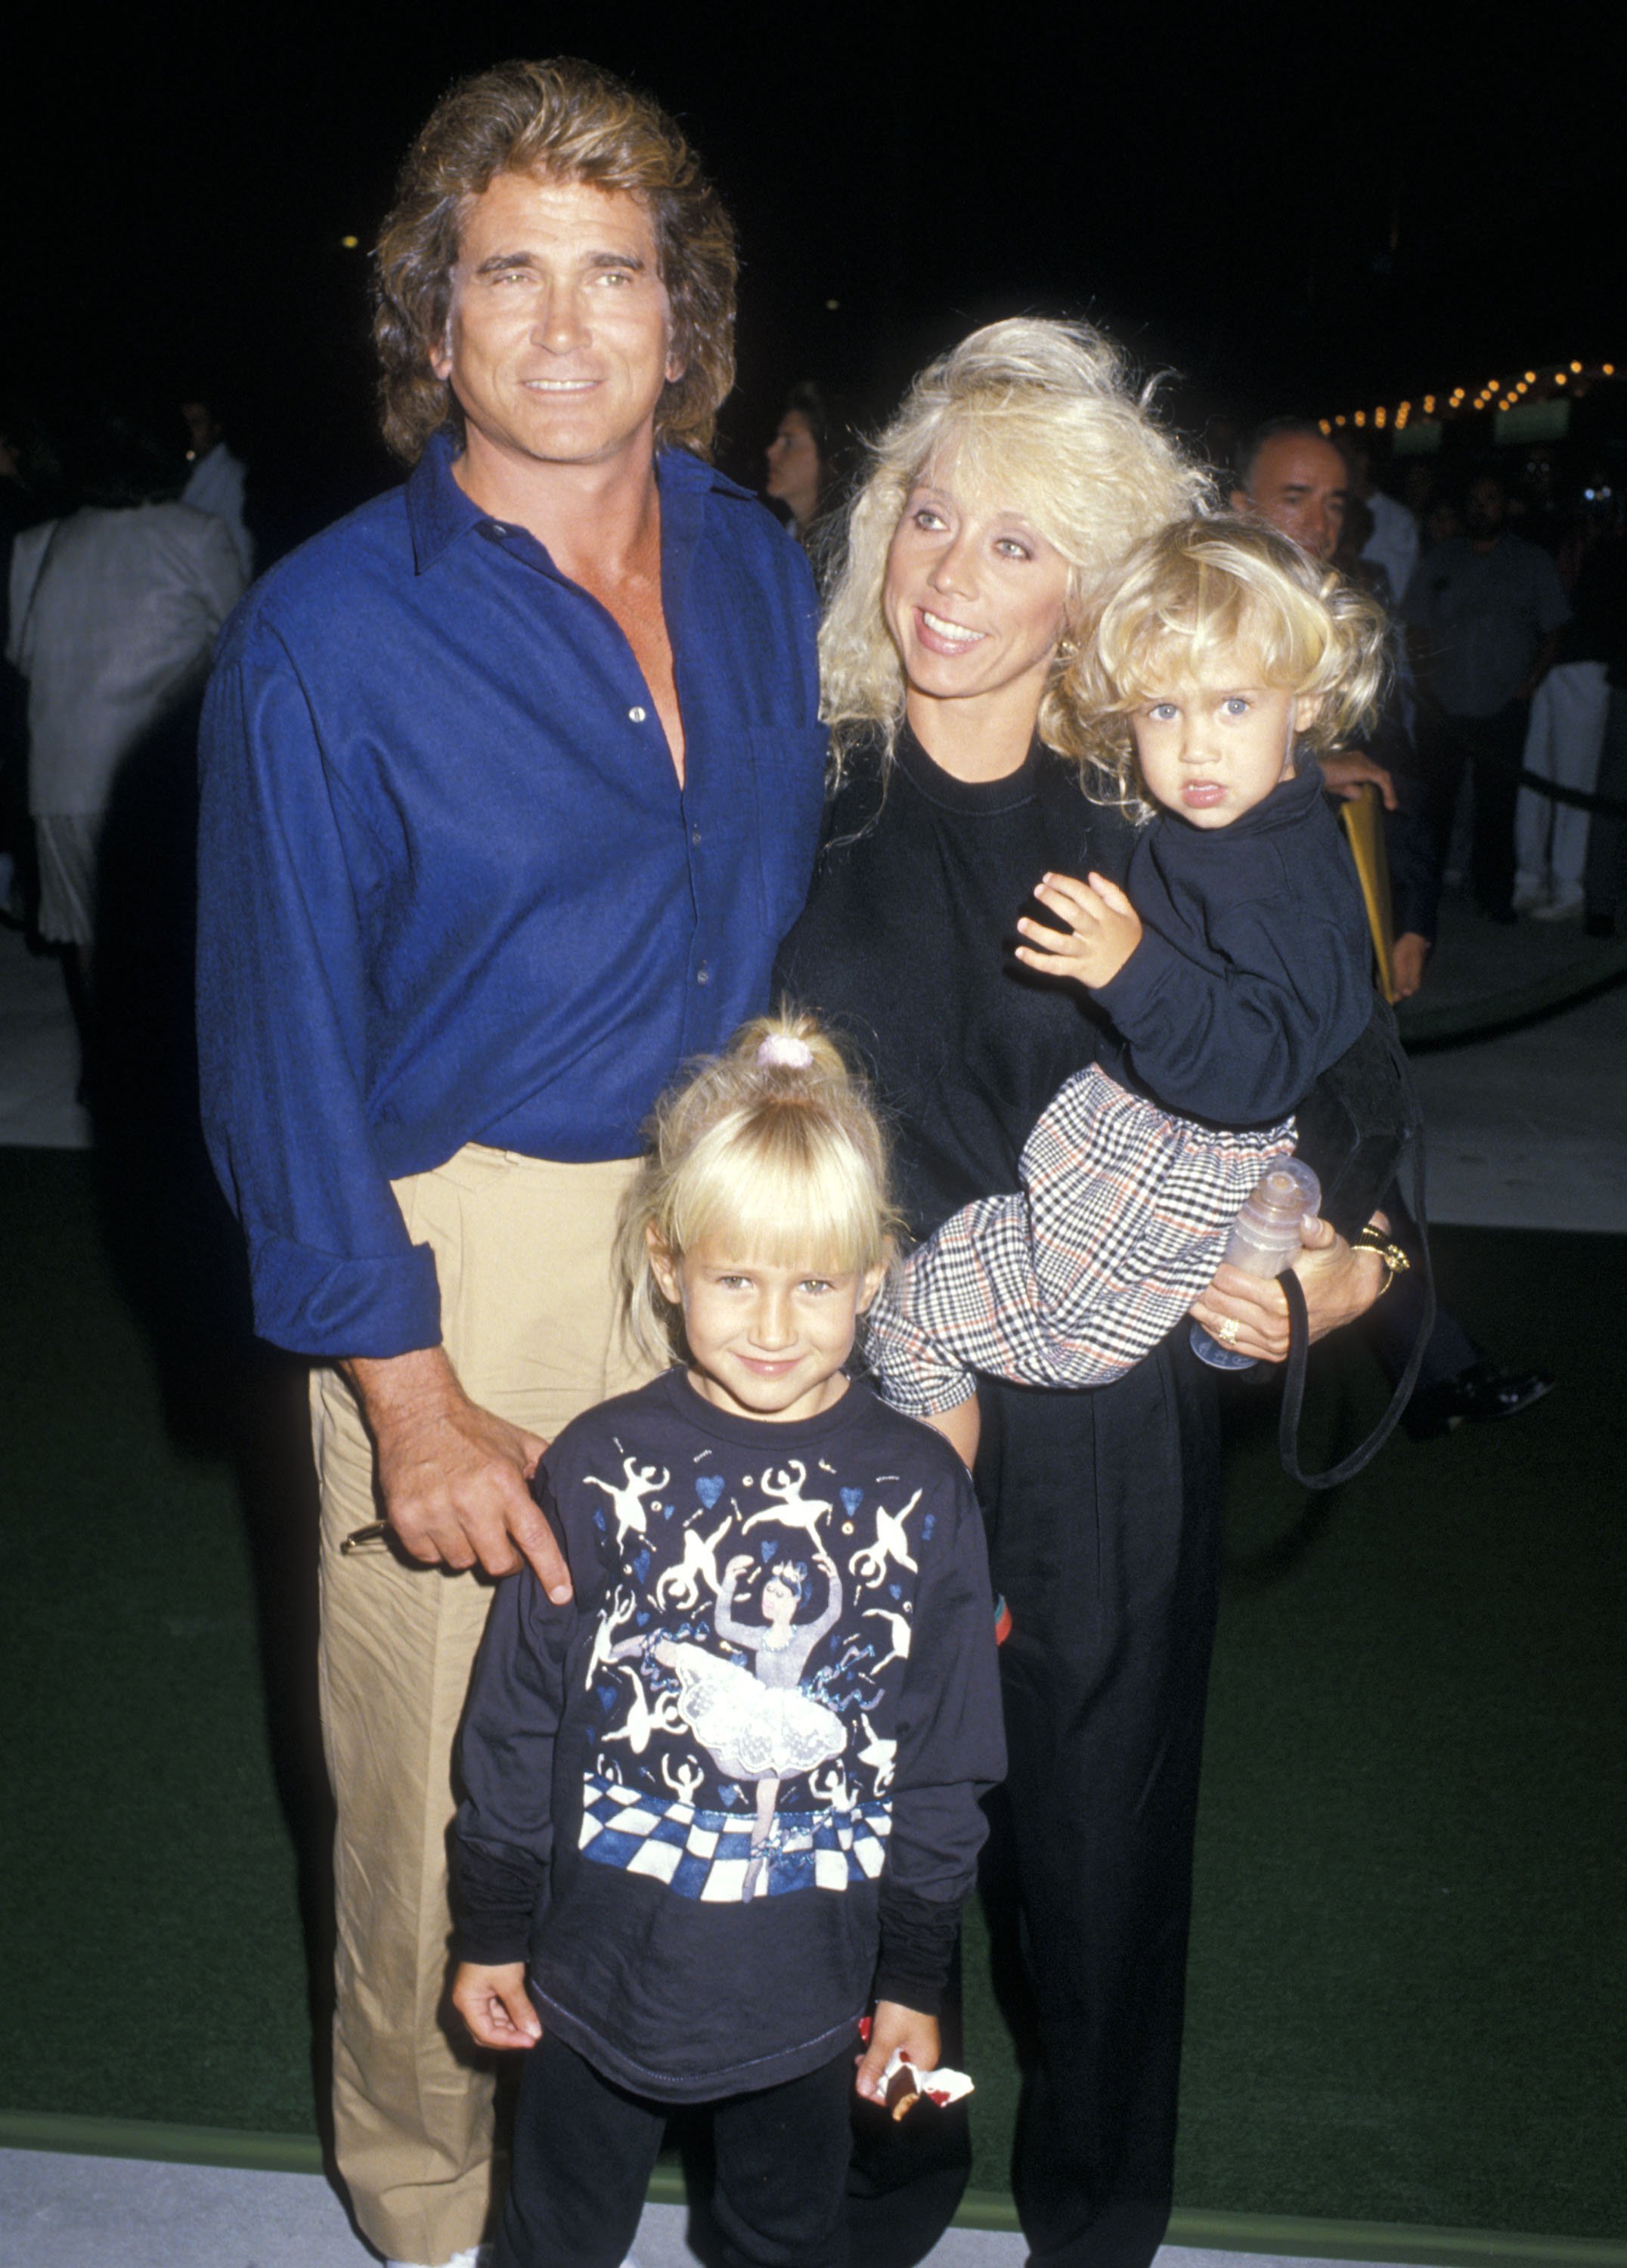 Michael Landon, wife Cindy Landon, daughter Jennifer Landon, and son Sean Landon attend the "Gorillas in the Mist: The Story of Dian Fossey" Universal City Premiere on September 19, 1988, at Cineplex Odeon Universal City Cinemas in Universal City, California. | Source: Getty Images